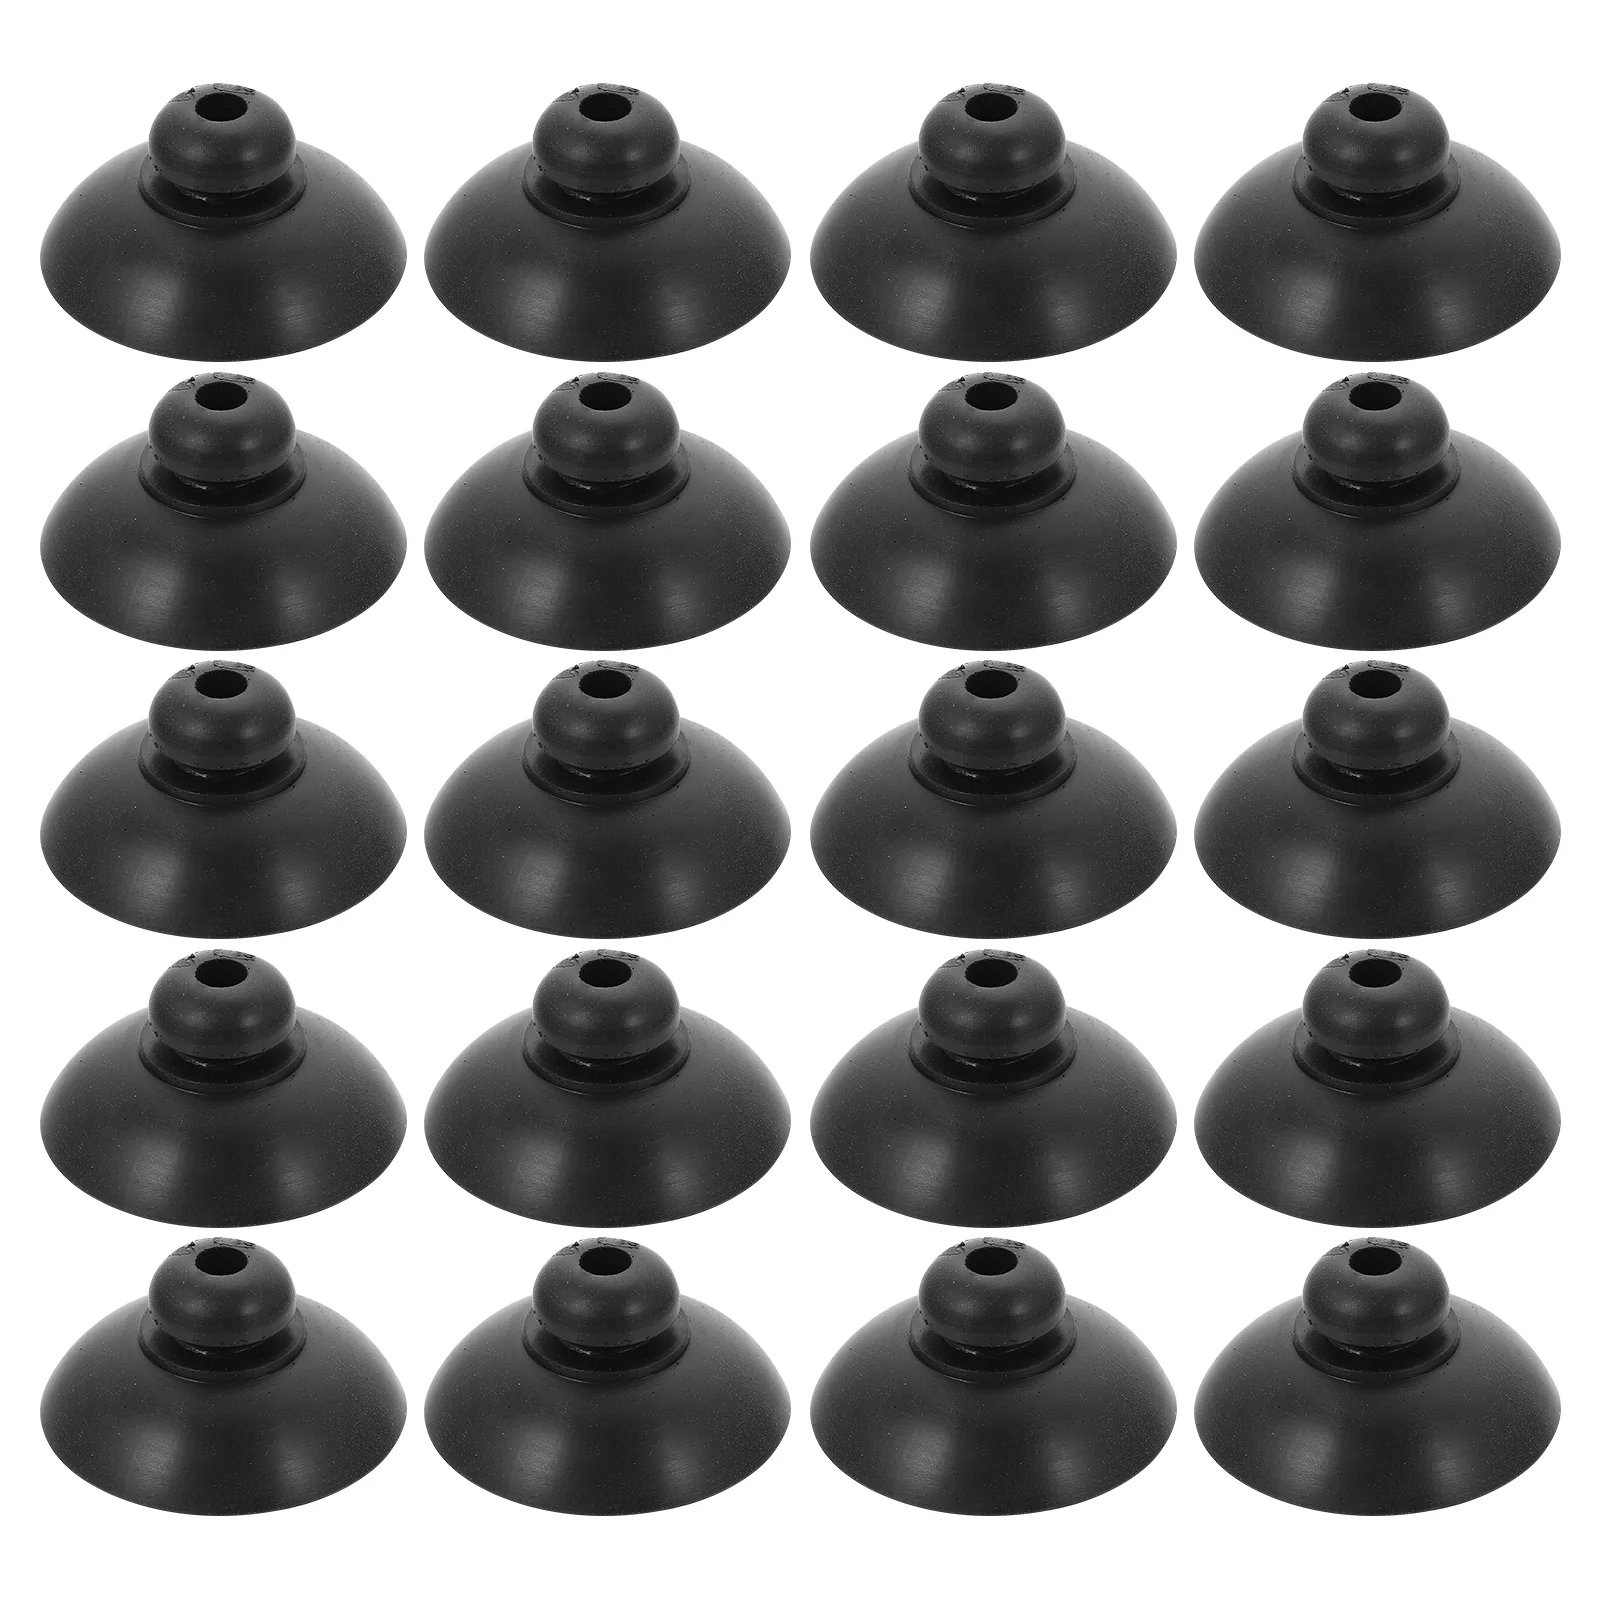 20 Pcs Fish Tank Sucker Holder for Water Pump Replacement Suction Cup Aeration Rubber Aquariums